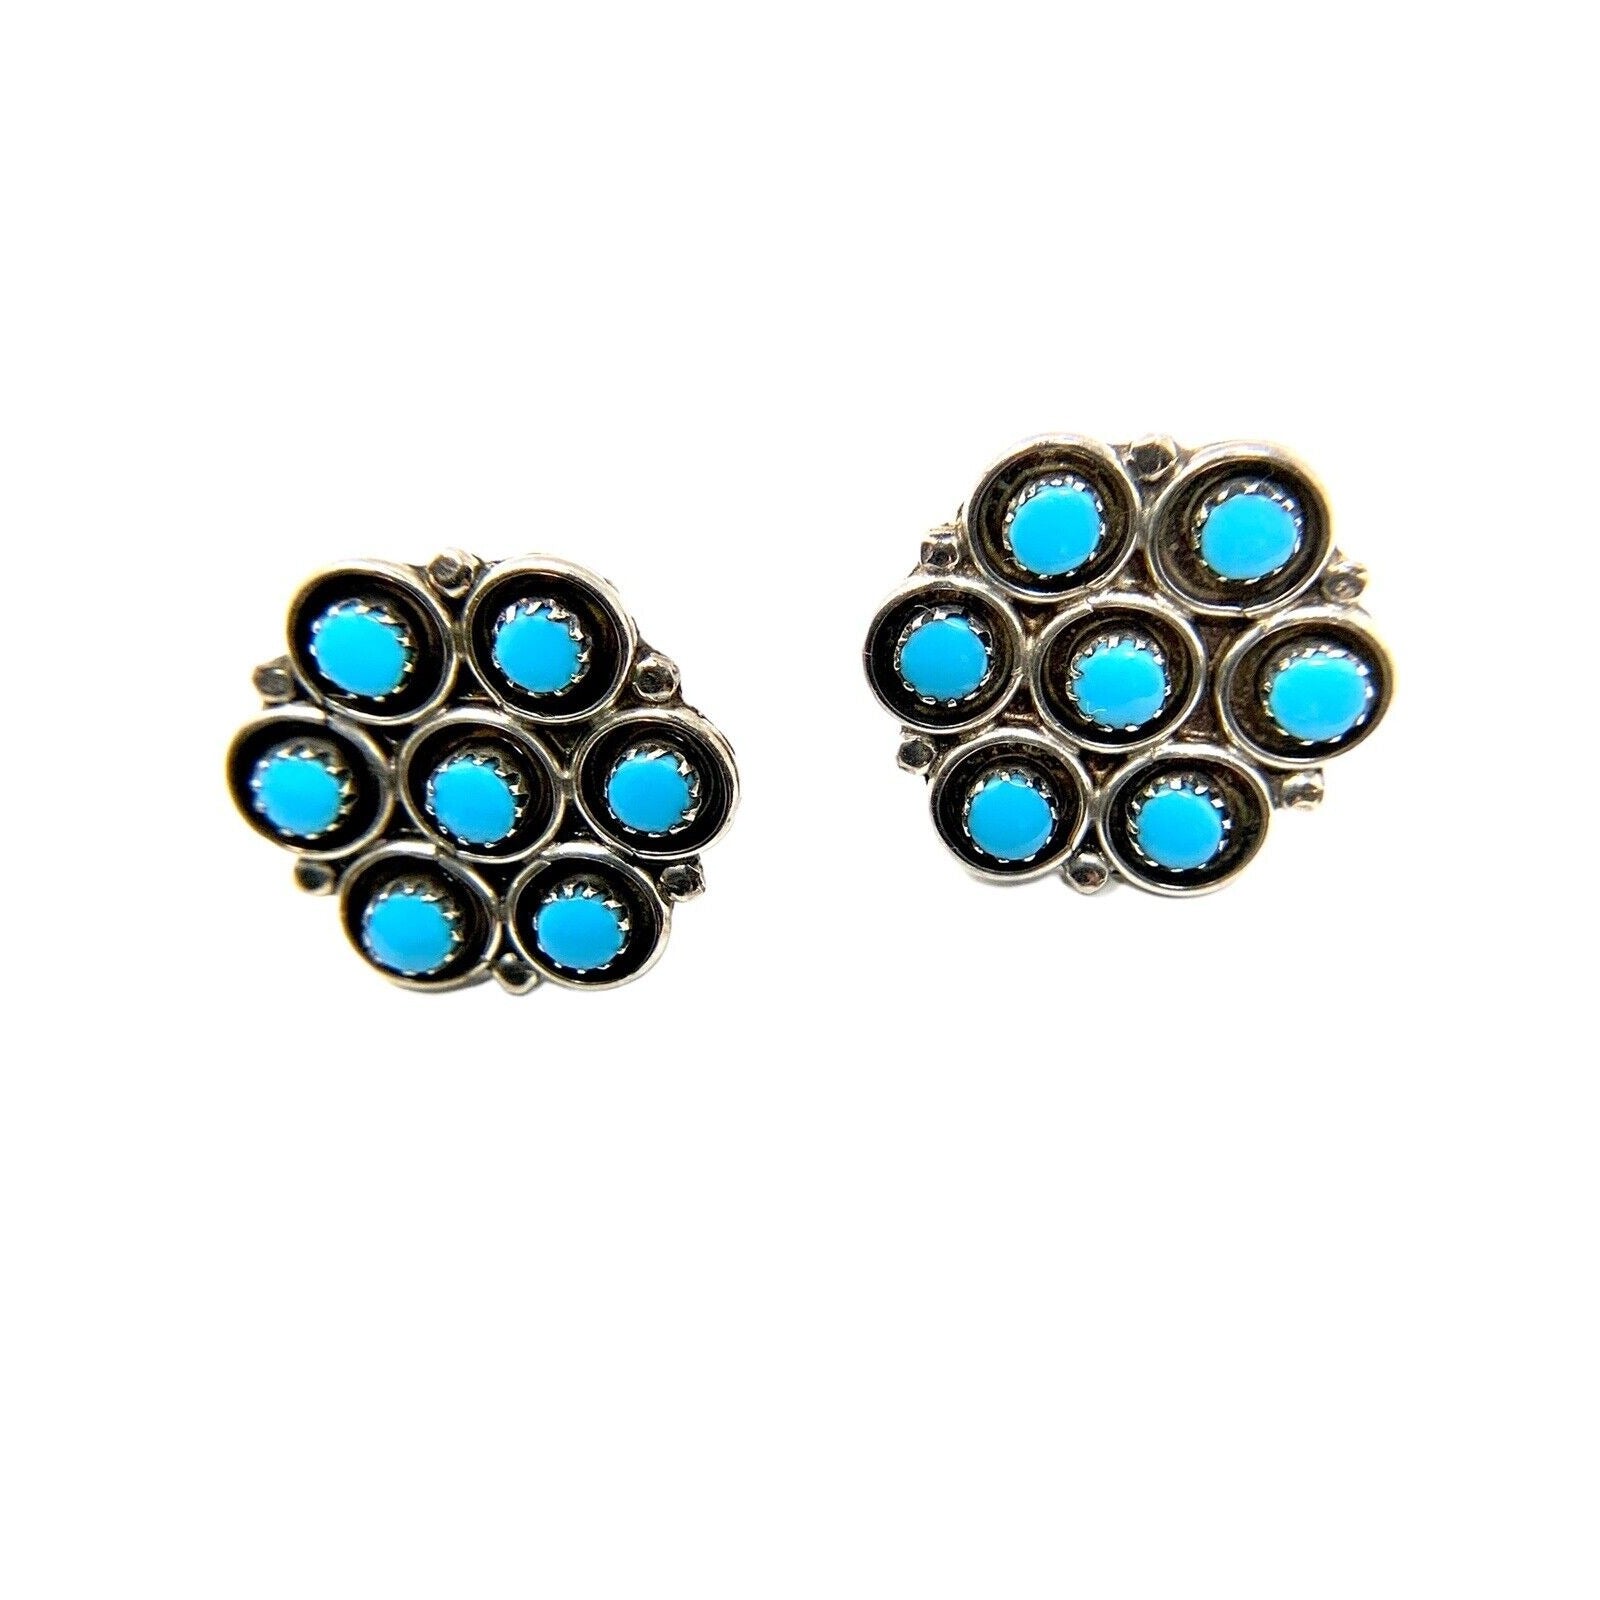 Blue Dot Stone And Stainless Steel Earrings